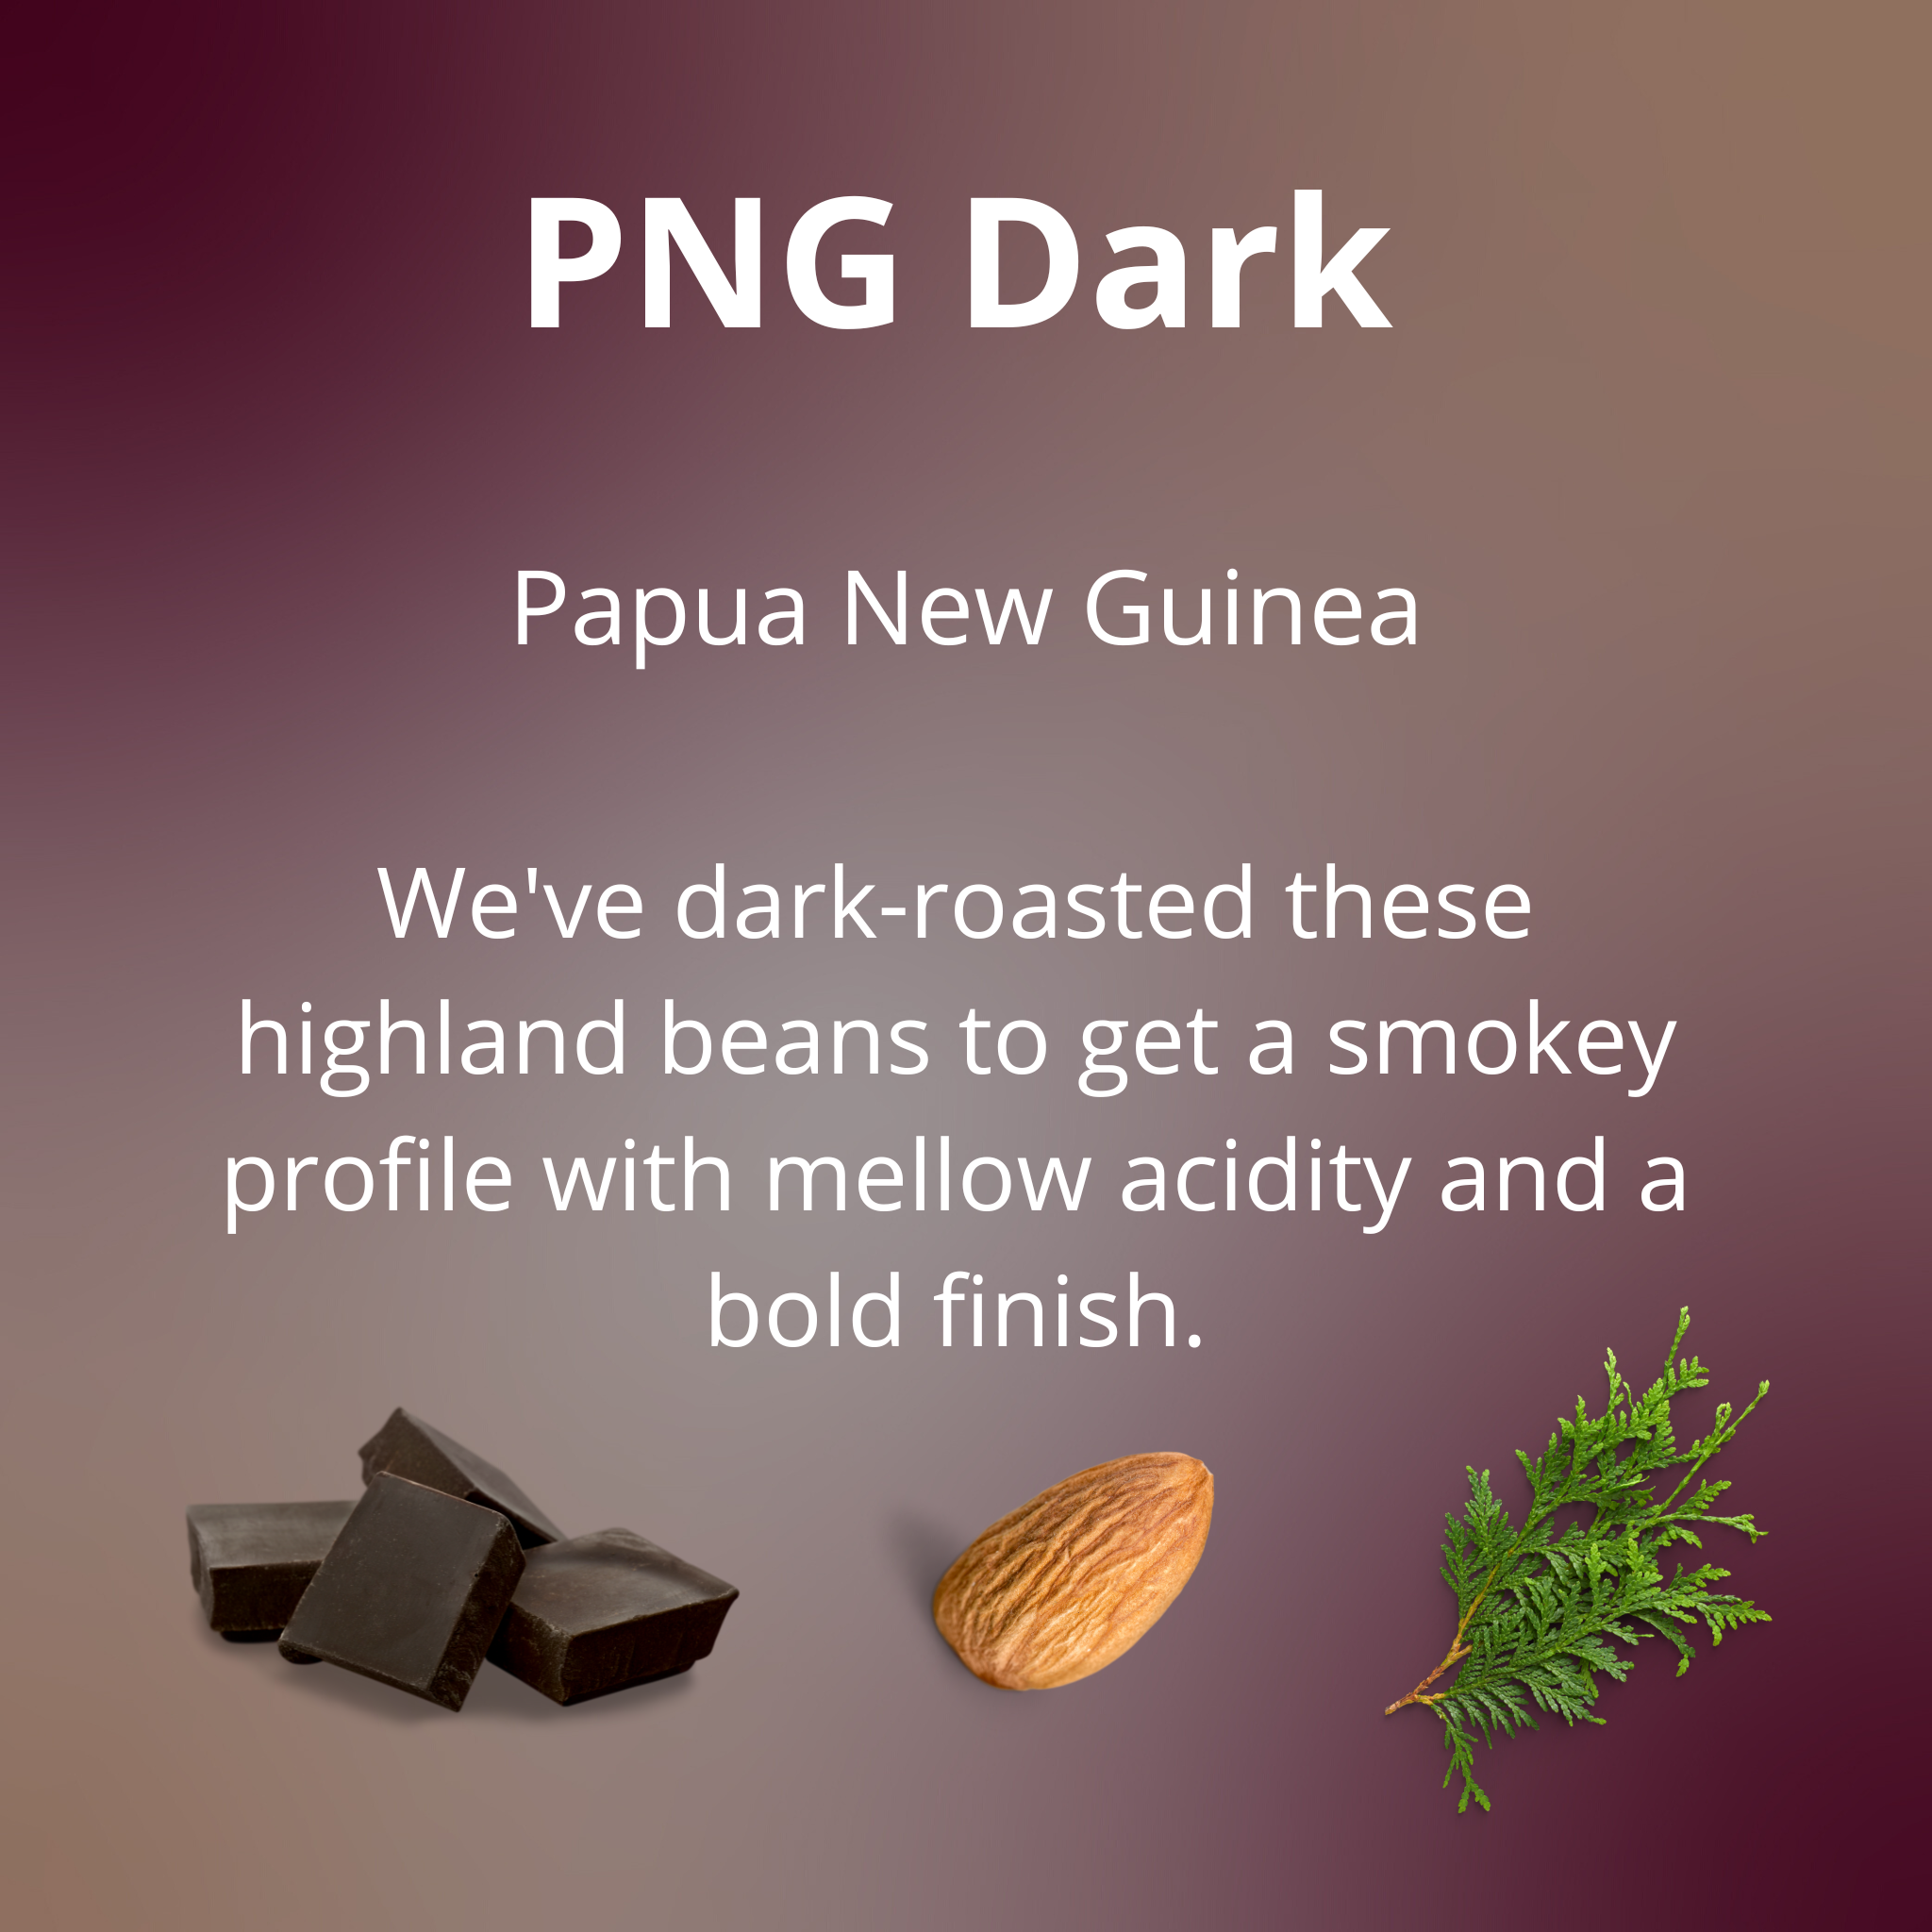  PNG Dark, from Papua New Guinea; we've dark-roasted these highland beans to get a smokey profile with mellow acidity and a bold finish